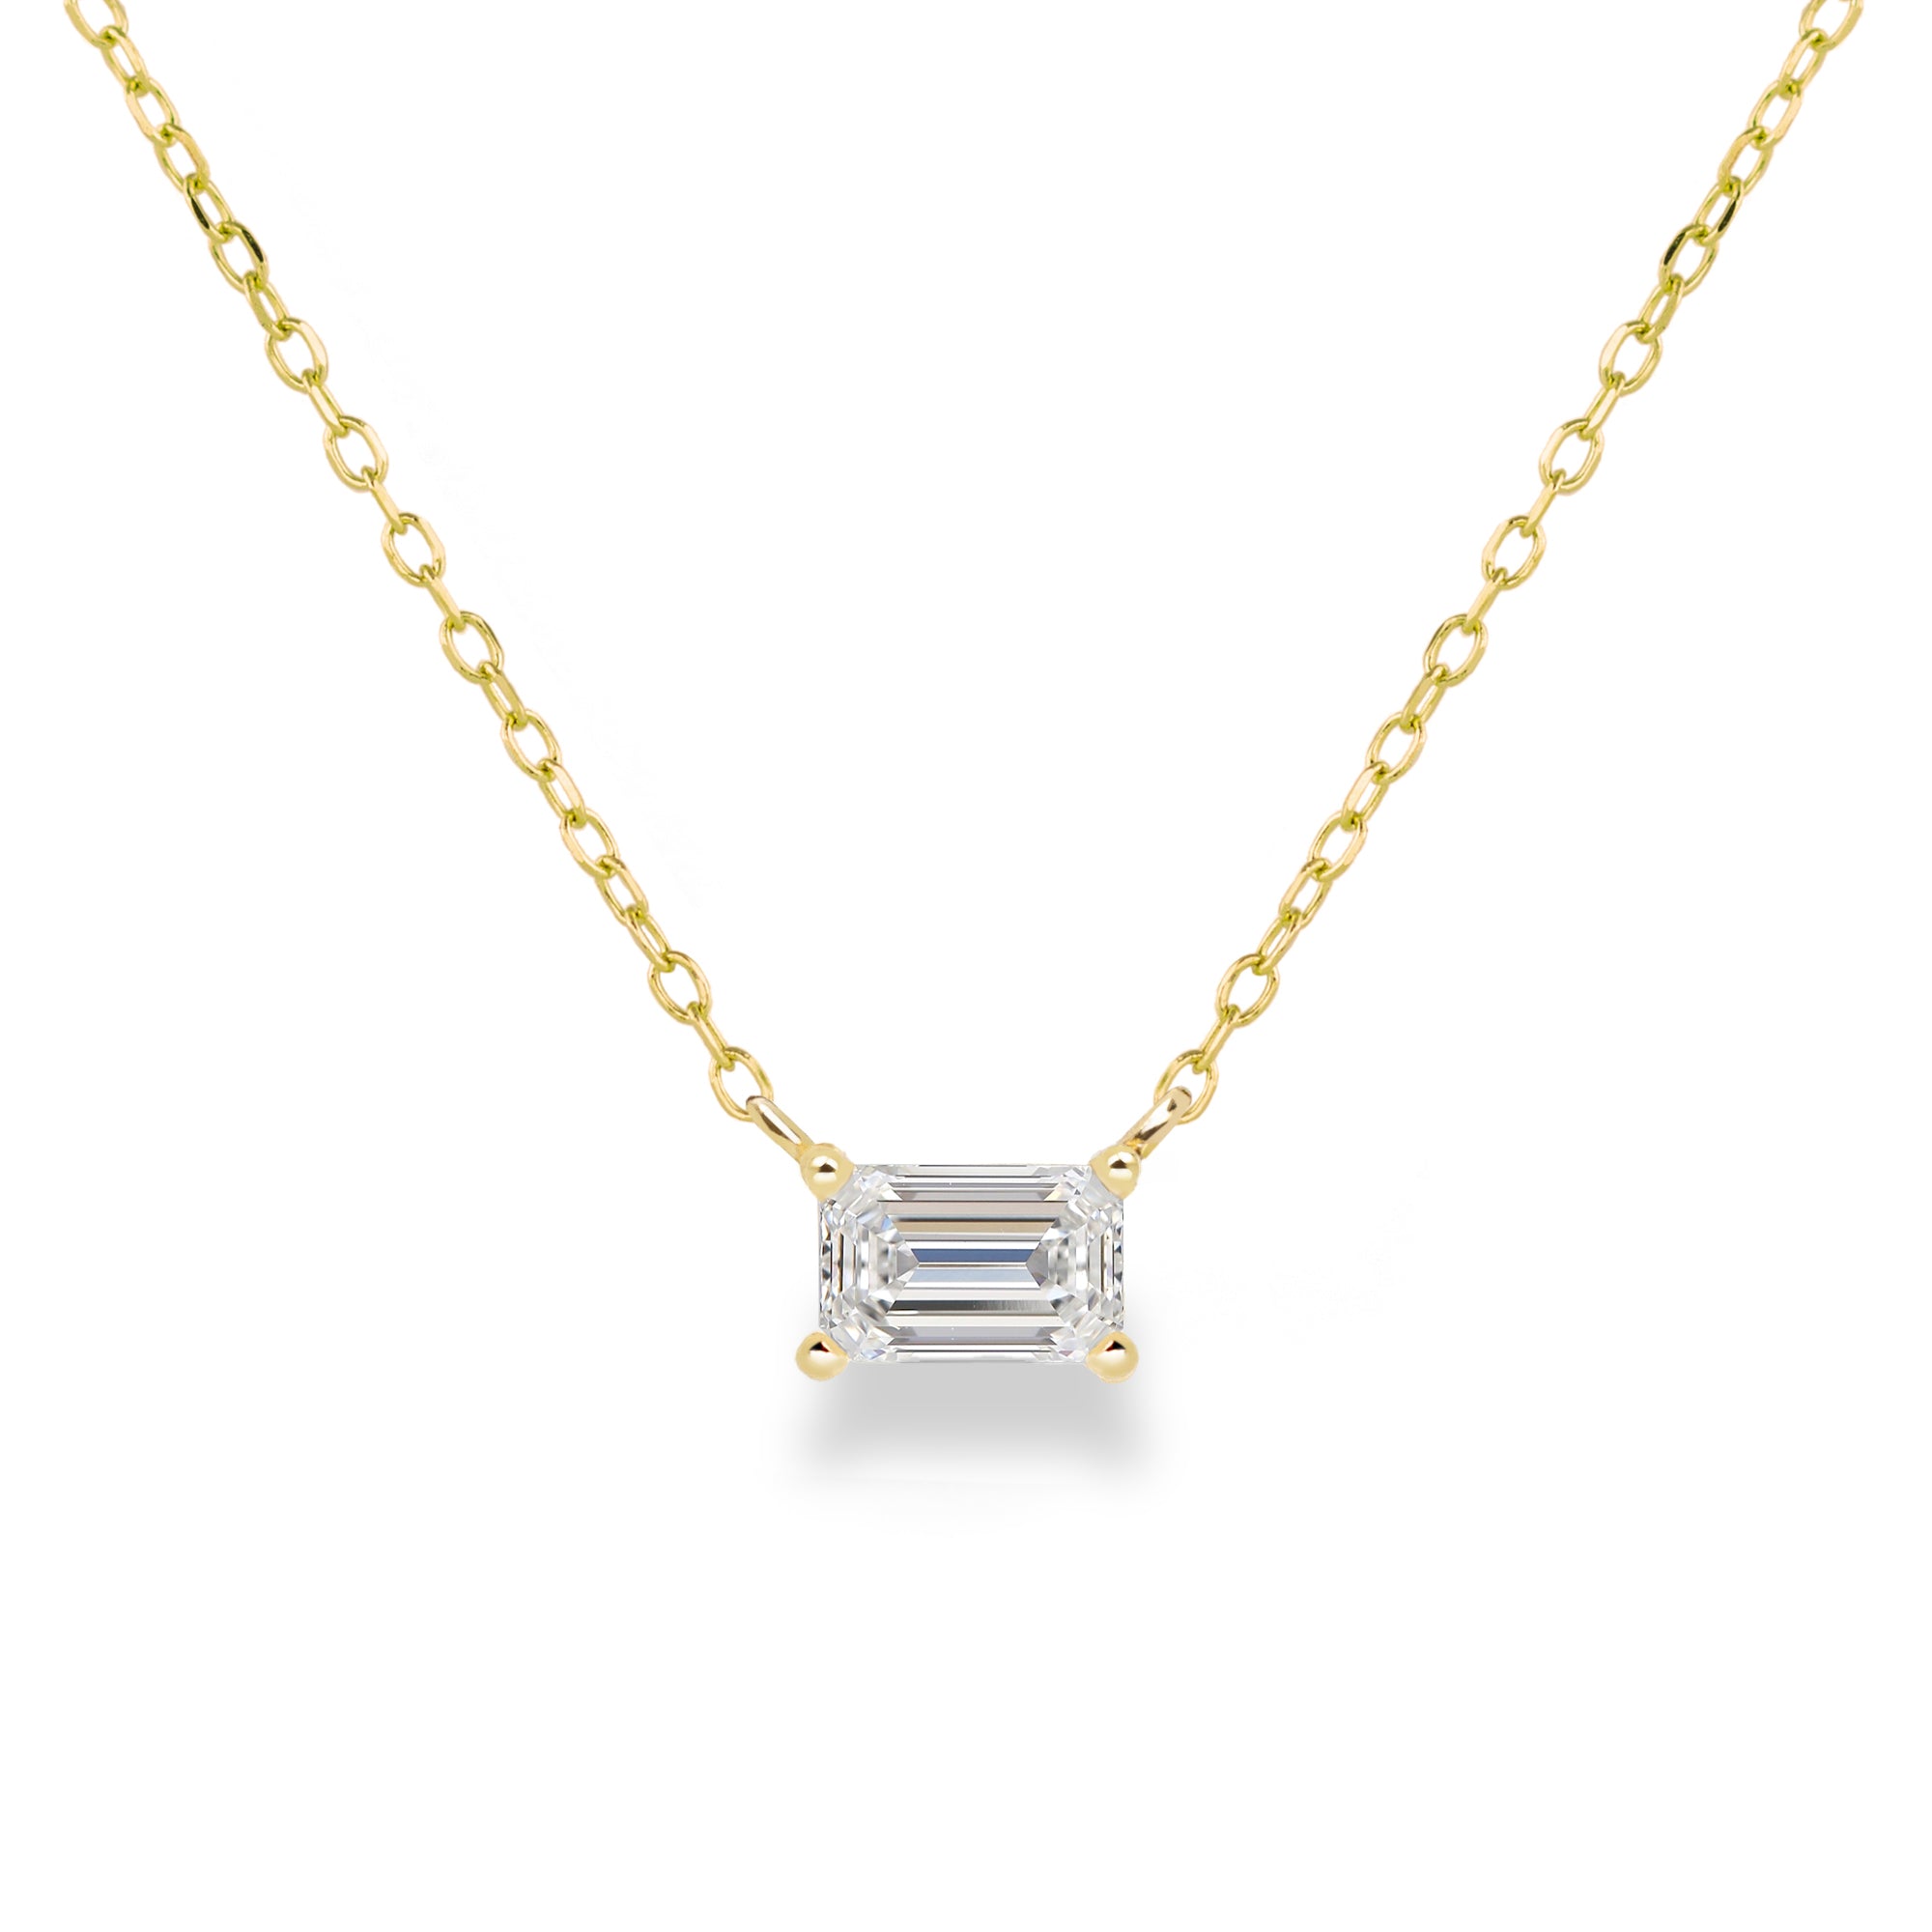 Jamie Park Jewelry Emerald Cut Diamond Solitaire Necklace This Emerald Diamond Solitaire Necklace features a sparkling lab diamond, set in a classic four prong design. With each diamond certified by IGI, this necklace makes for a timeless and cherished gift, perfect for any special occasion. Add a touch of elegance to any outfit with this beautiful piece. Chain length 16-18"&nbsp;